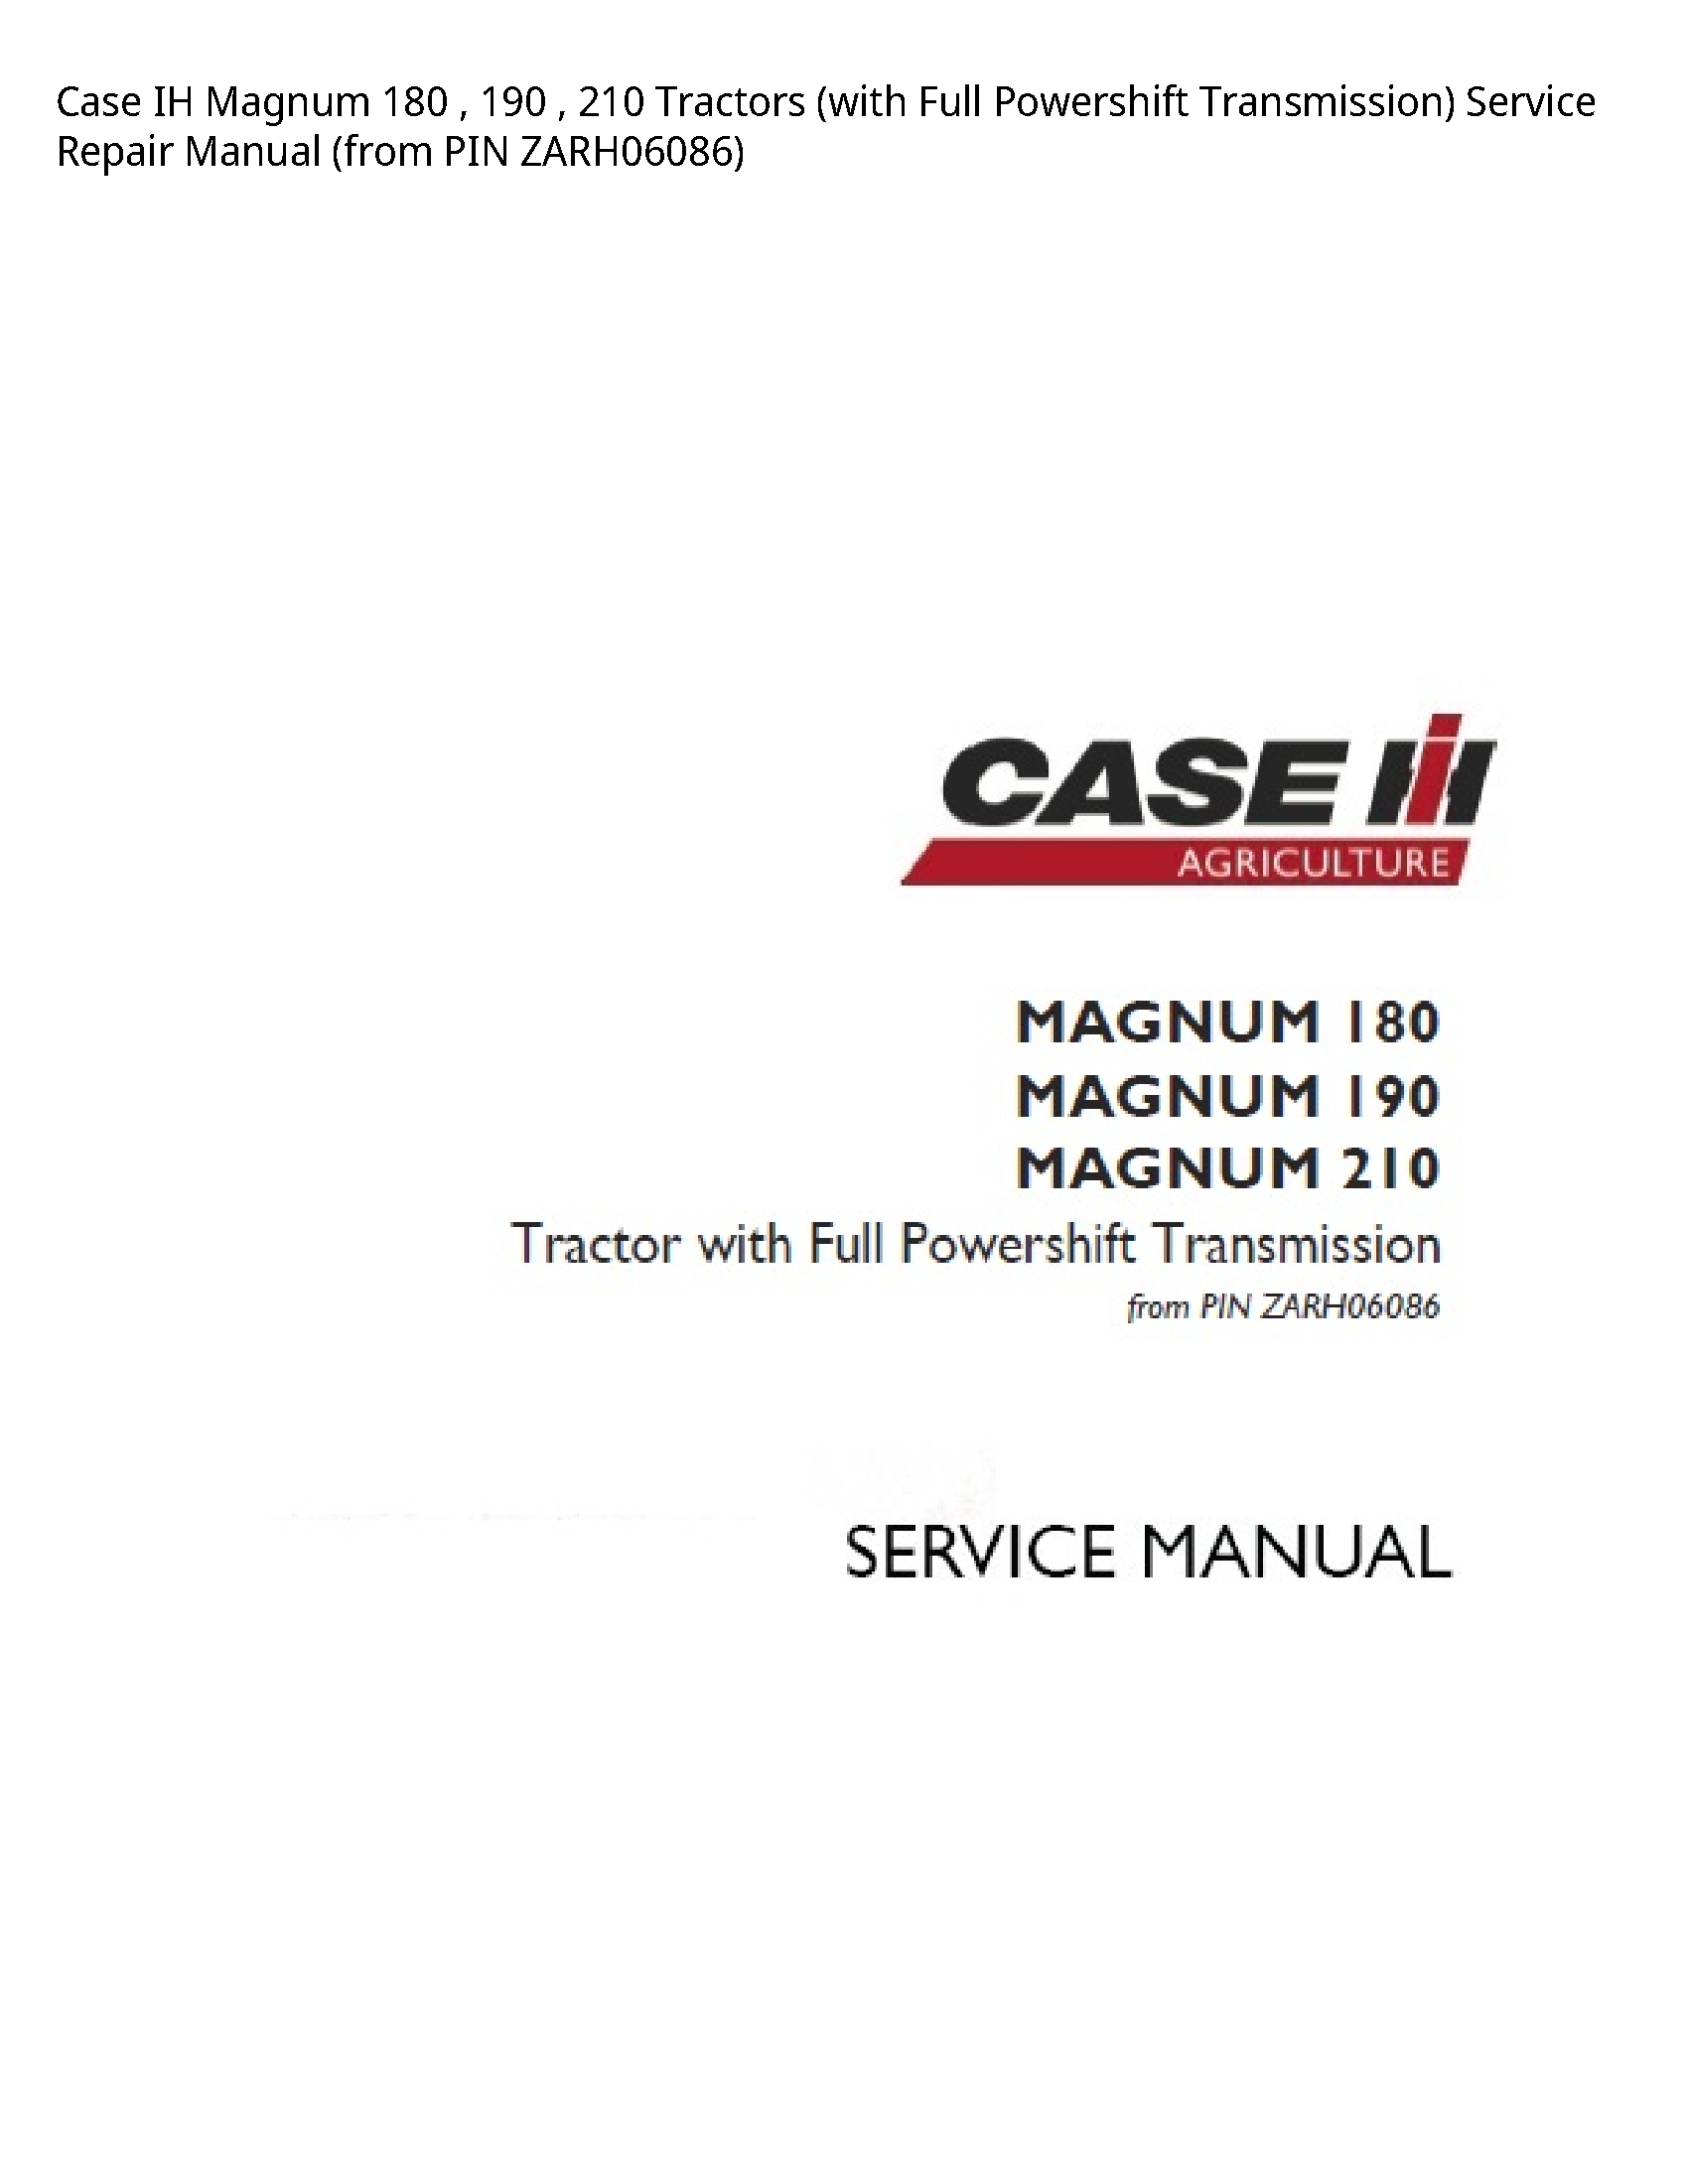 Case/Case IH 180 IH Magnum Tractors (with Full Powershift Transmission) manual